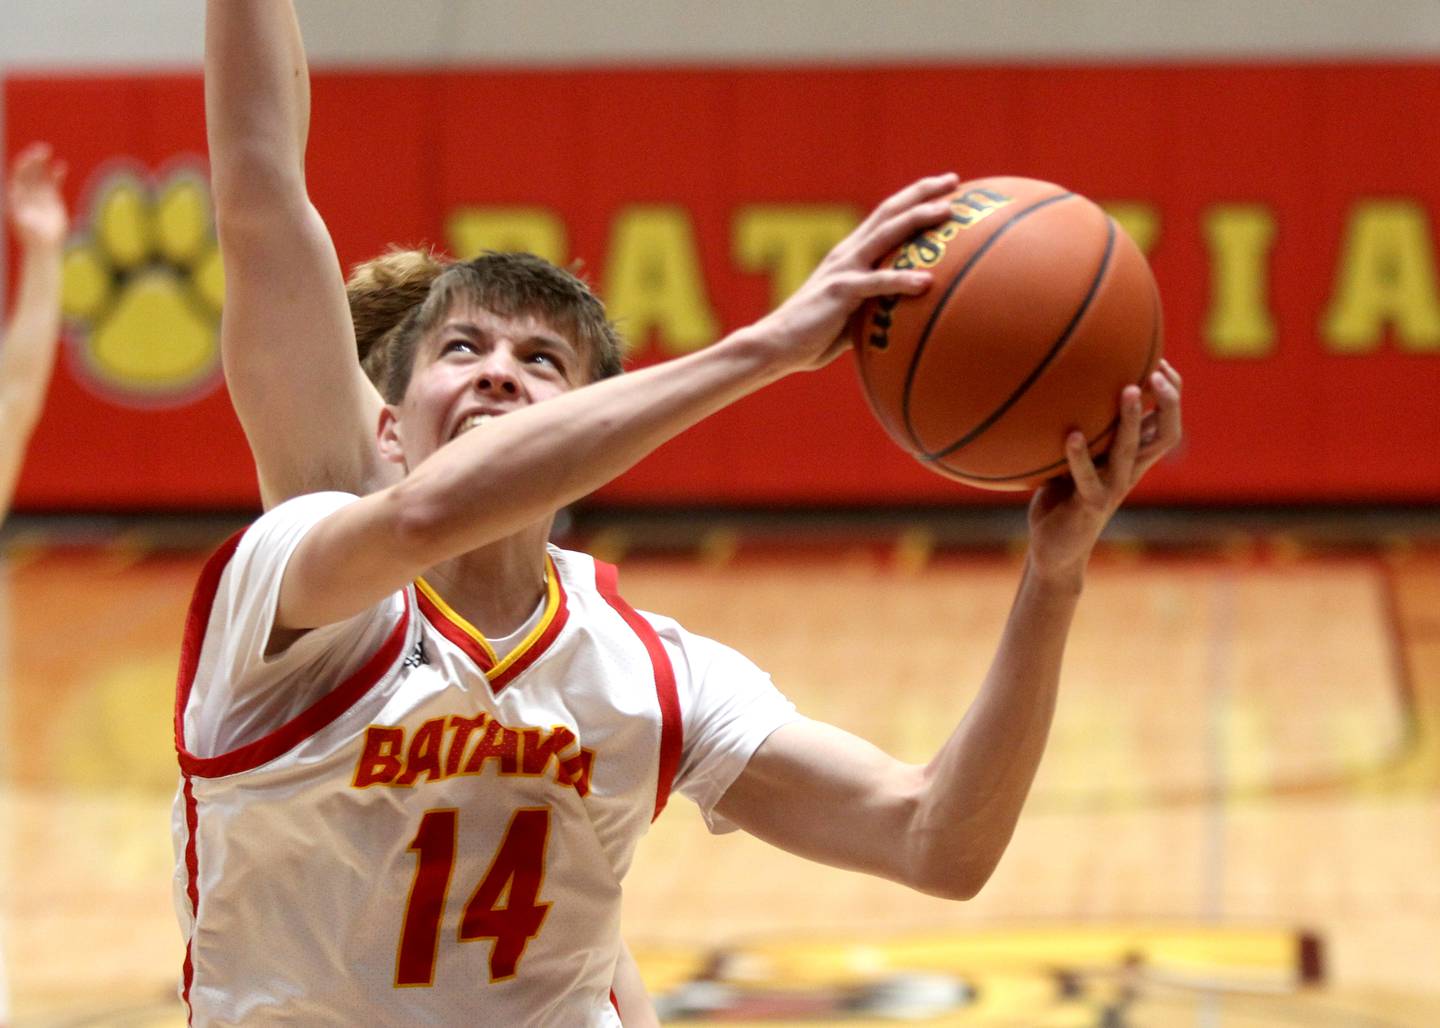 Batavia’s Jack Ambrose goes up for a shot during a home game against Geneva on Friday, Dec. 16, 2022.